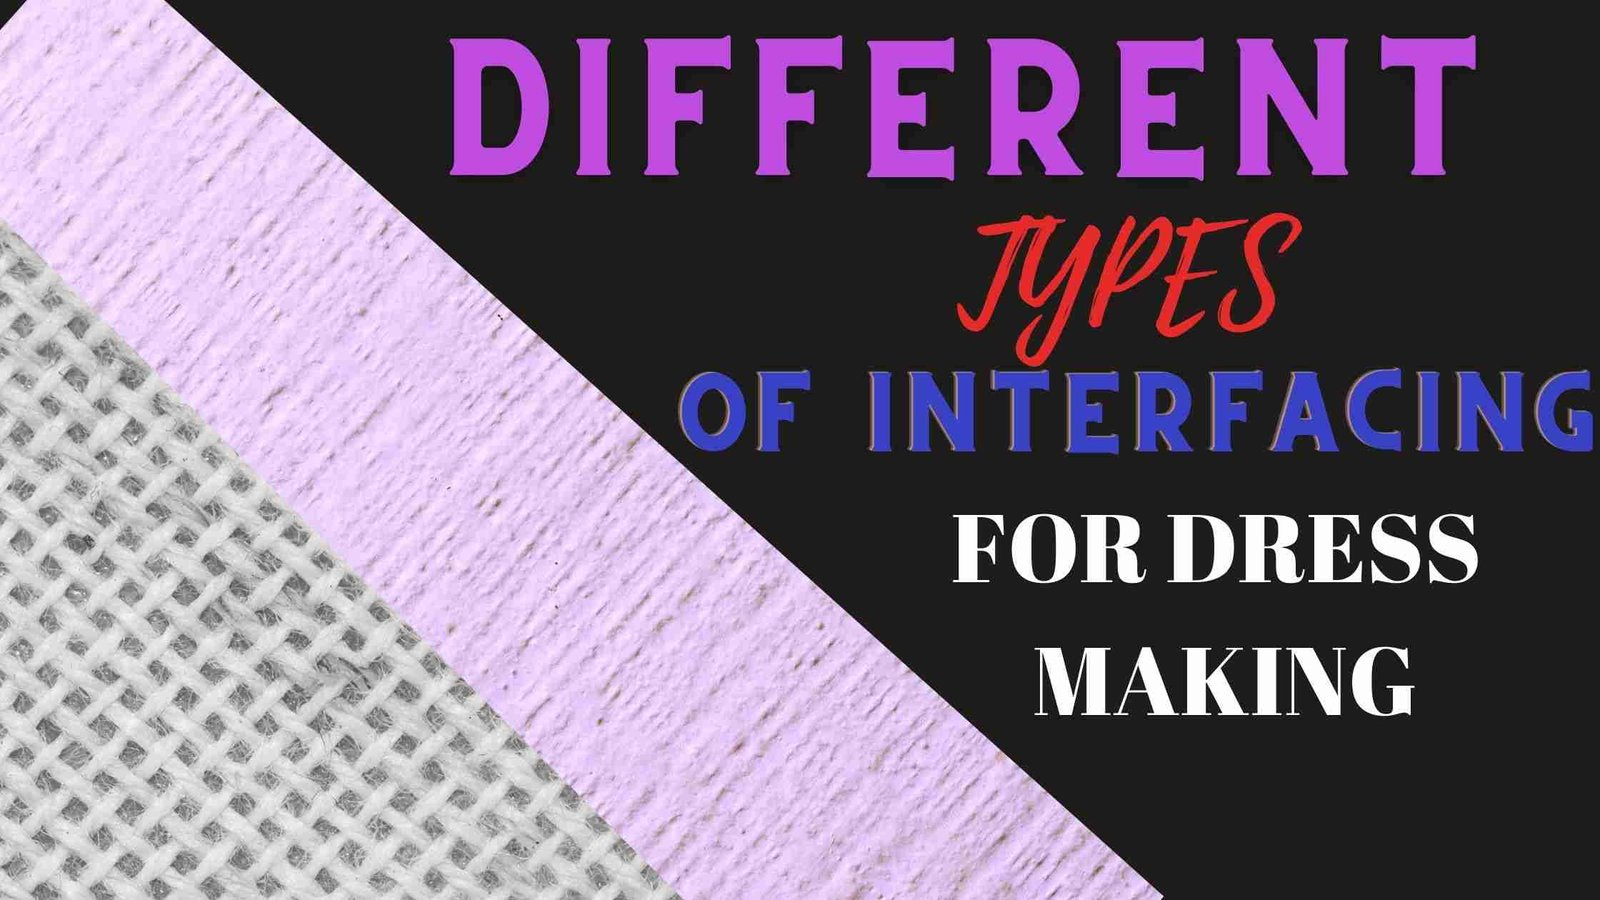 You are currently viewing DIFFERENT TYPES OF INTERFACING FOR DRESS MAKING.